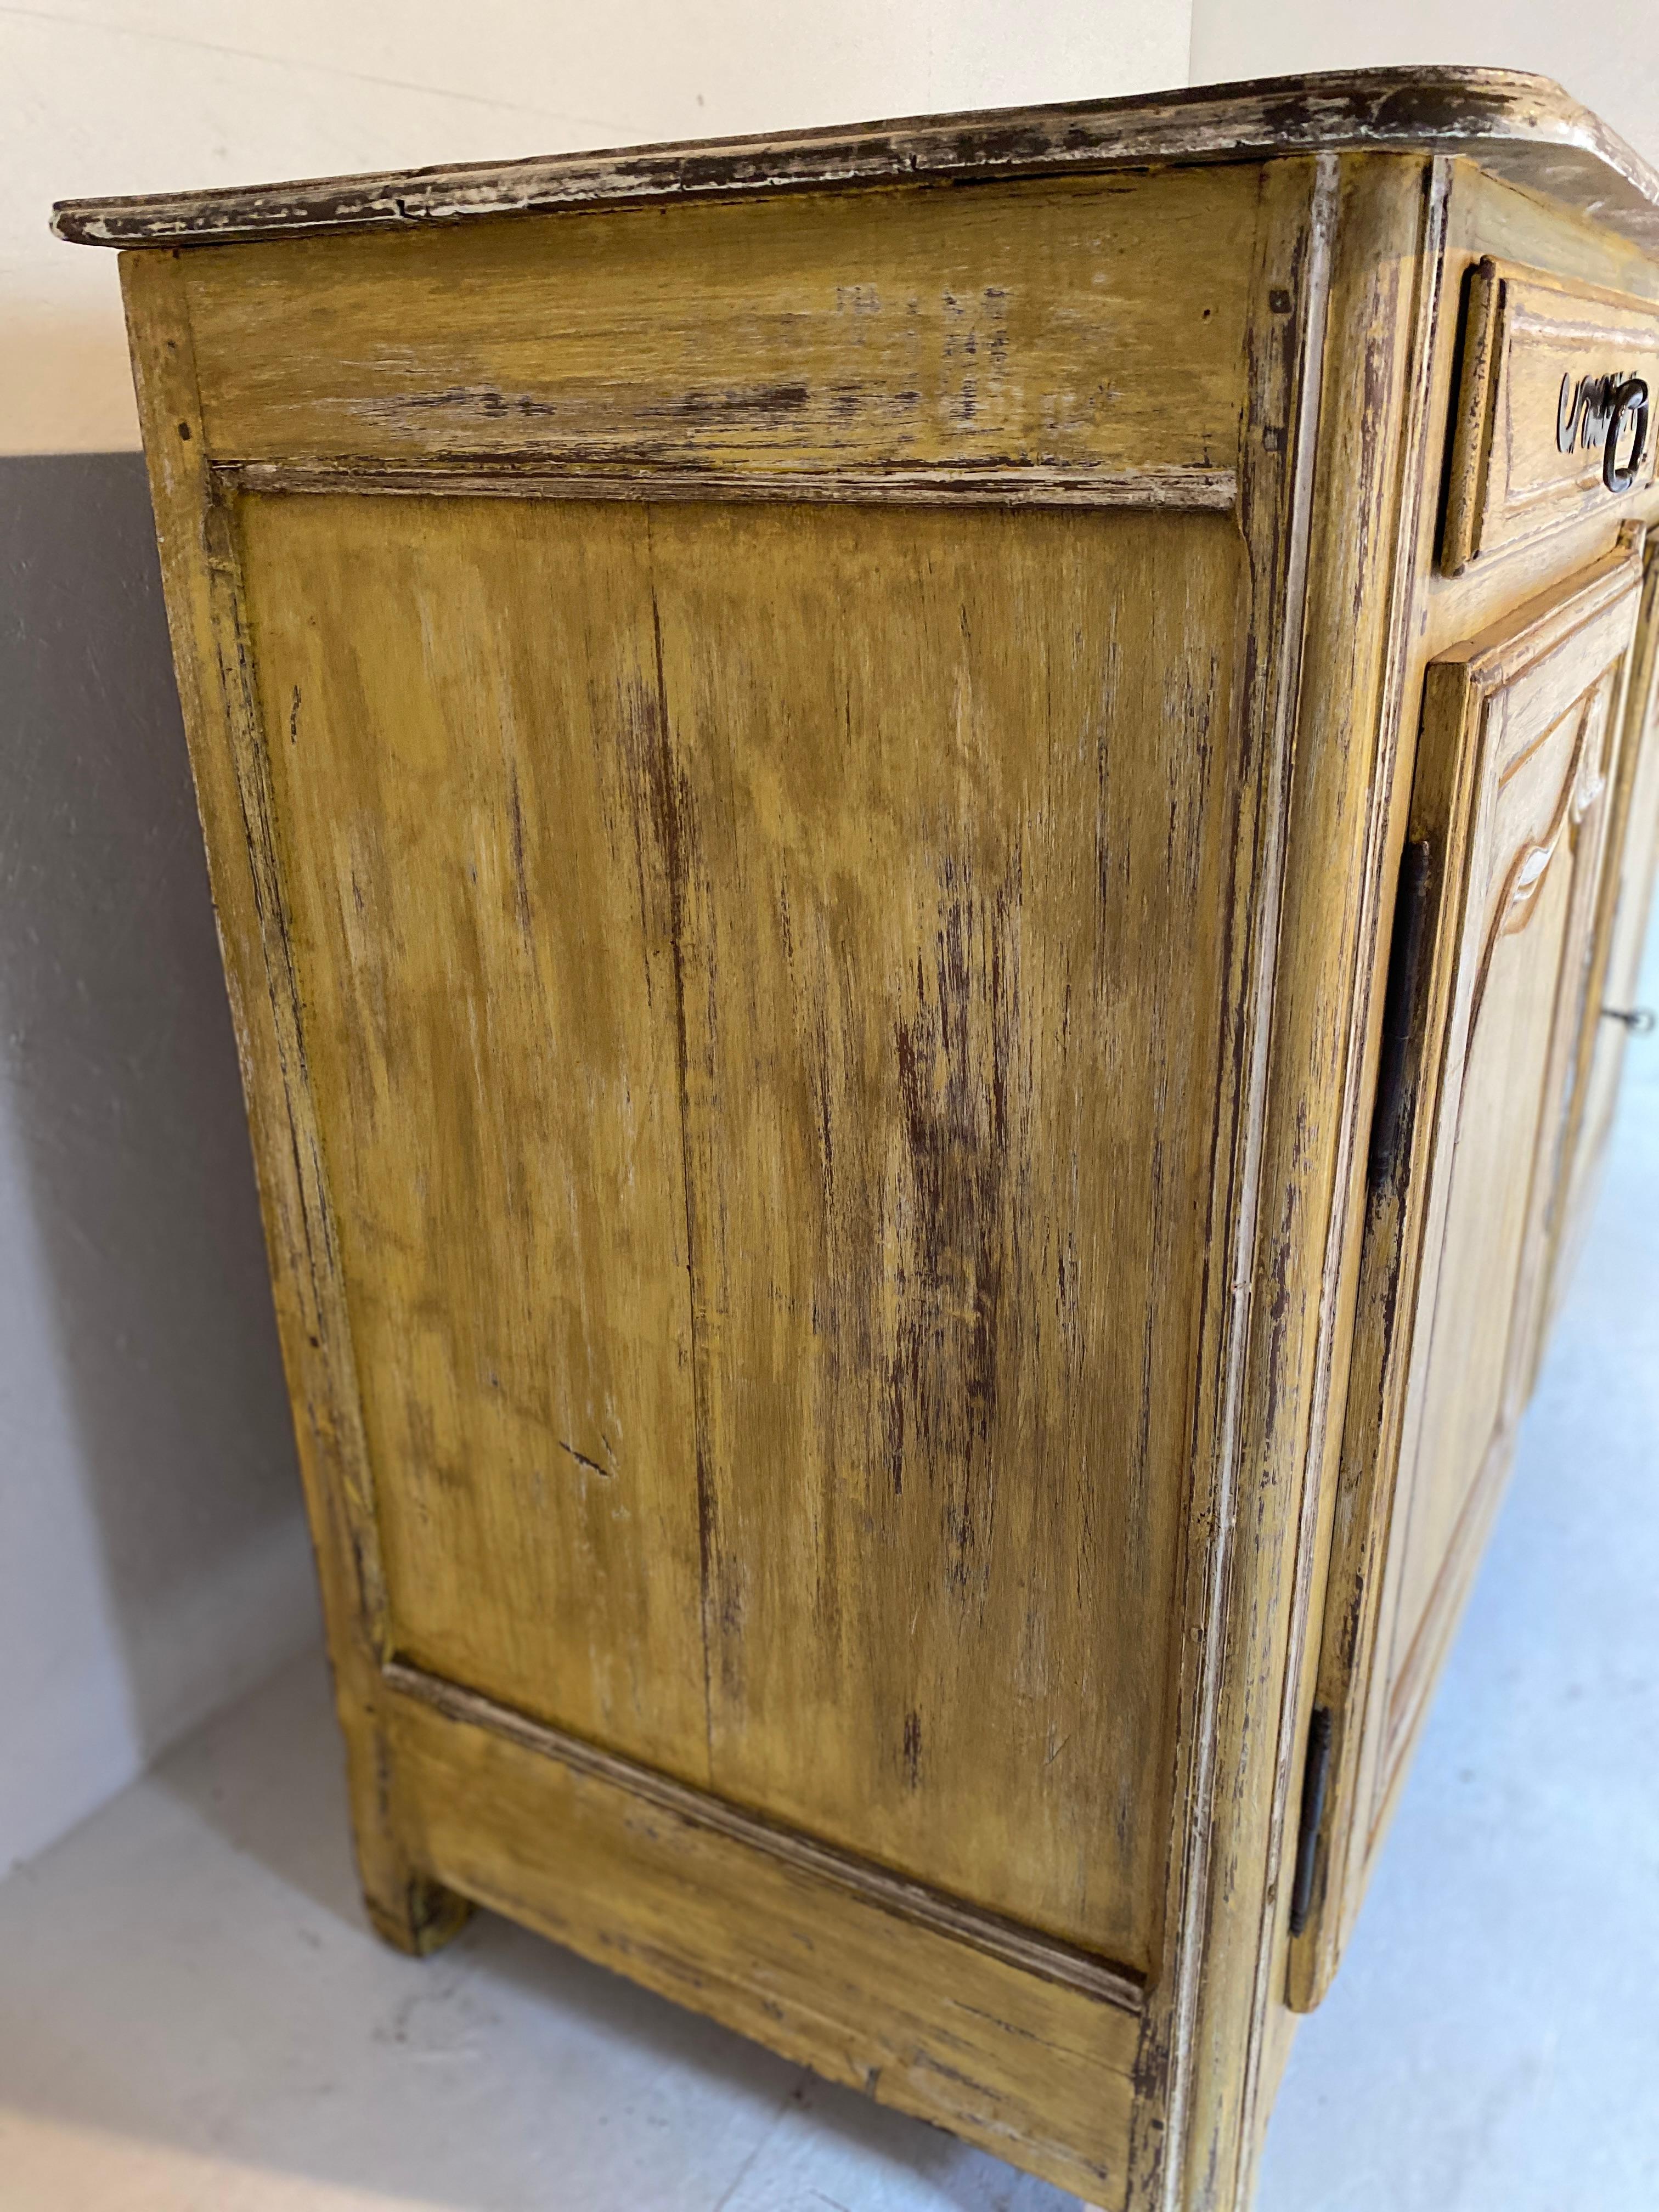 Magnificent Louis XIV 18th century dresser with a patina in the spirit of the south of France with the scent of the sun, composed of 2 drawers and 2 doors with rounded corners, this flat piece of furniture gives color to the room a polychromy